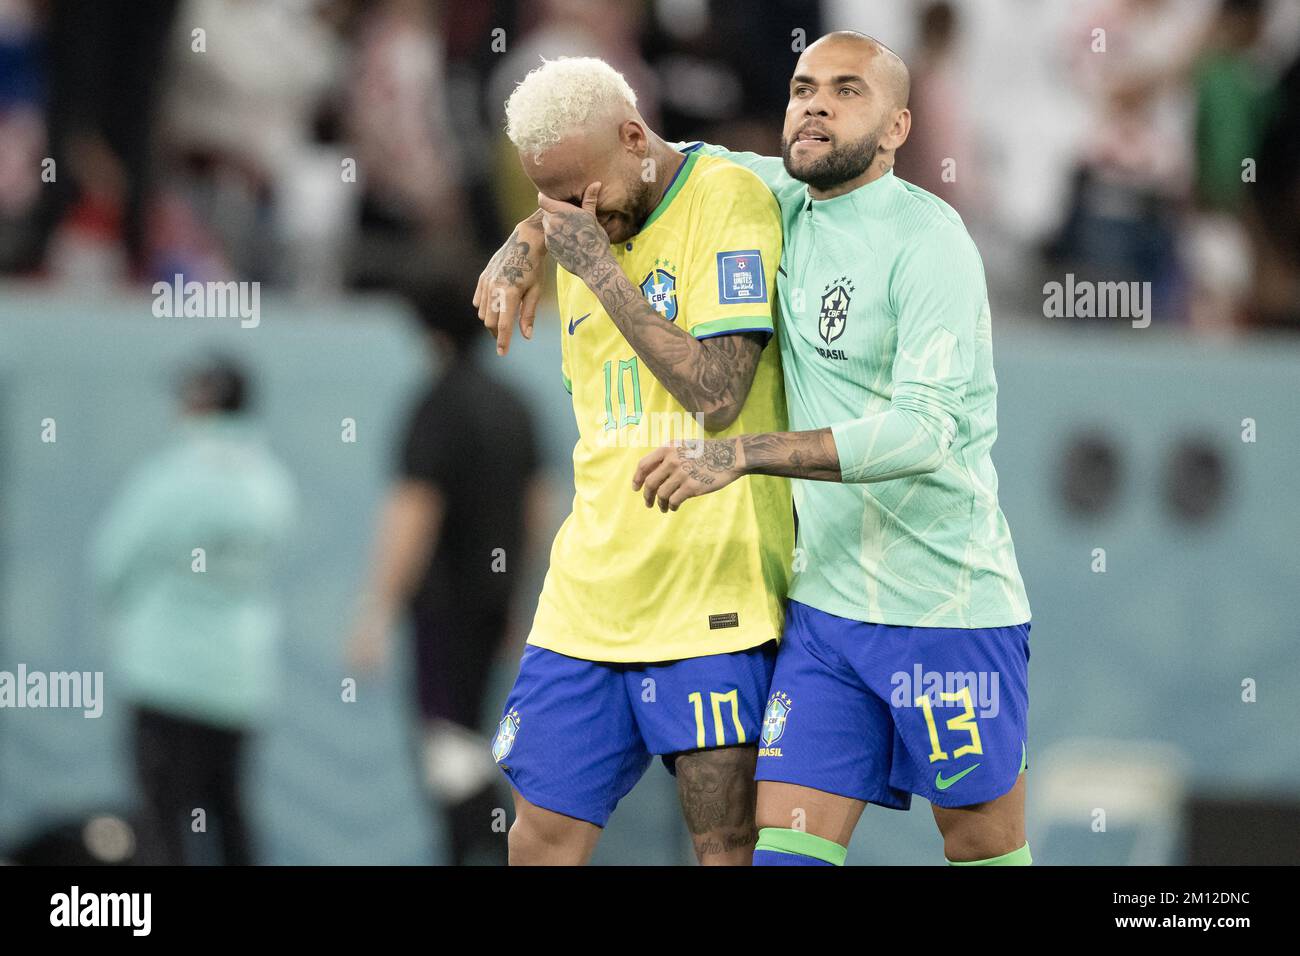 Doha, Qatar. 09th Dec, 2022. Doha, Qatar. 09th Dec, 2022. Neymar Jr and Dani Alves of Brazil look dejected after their sides' elimination from the tournament after a penalty shoot out loss during the FIFA World Cup Qatar 2022 quarter final match between Croatia and Brazil at Education City Stadium on December 09, 2022 in Doha, Qatar. Photo by David Niviere/ABACAPRESS.COM Credit: Abaca Press/Alamy Live News Credit: Abaca Press/Alamy Live News Credit: Abaca Press/Alamy Live News Stock Photo